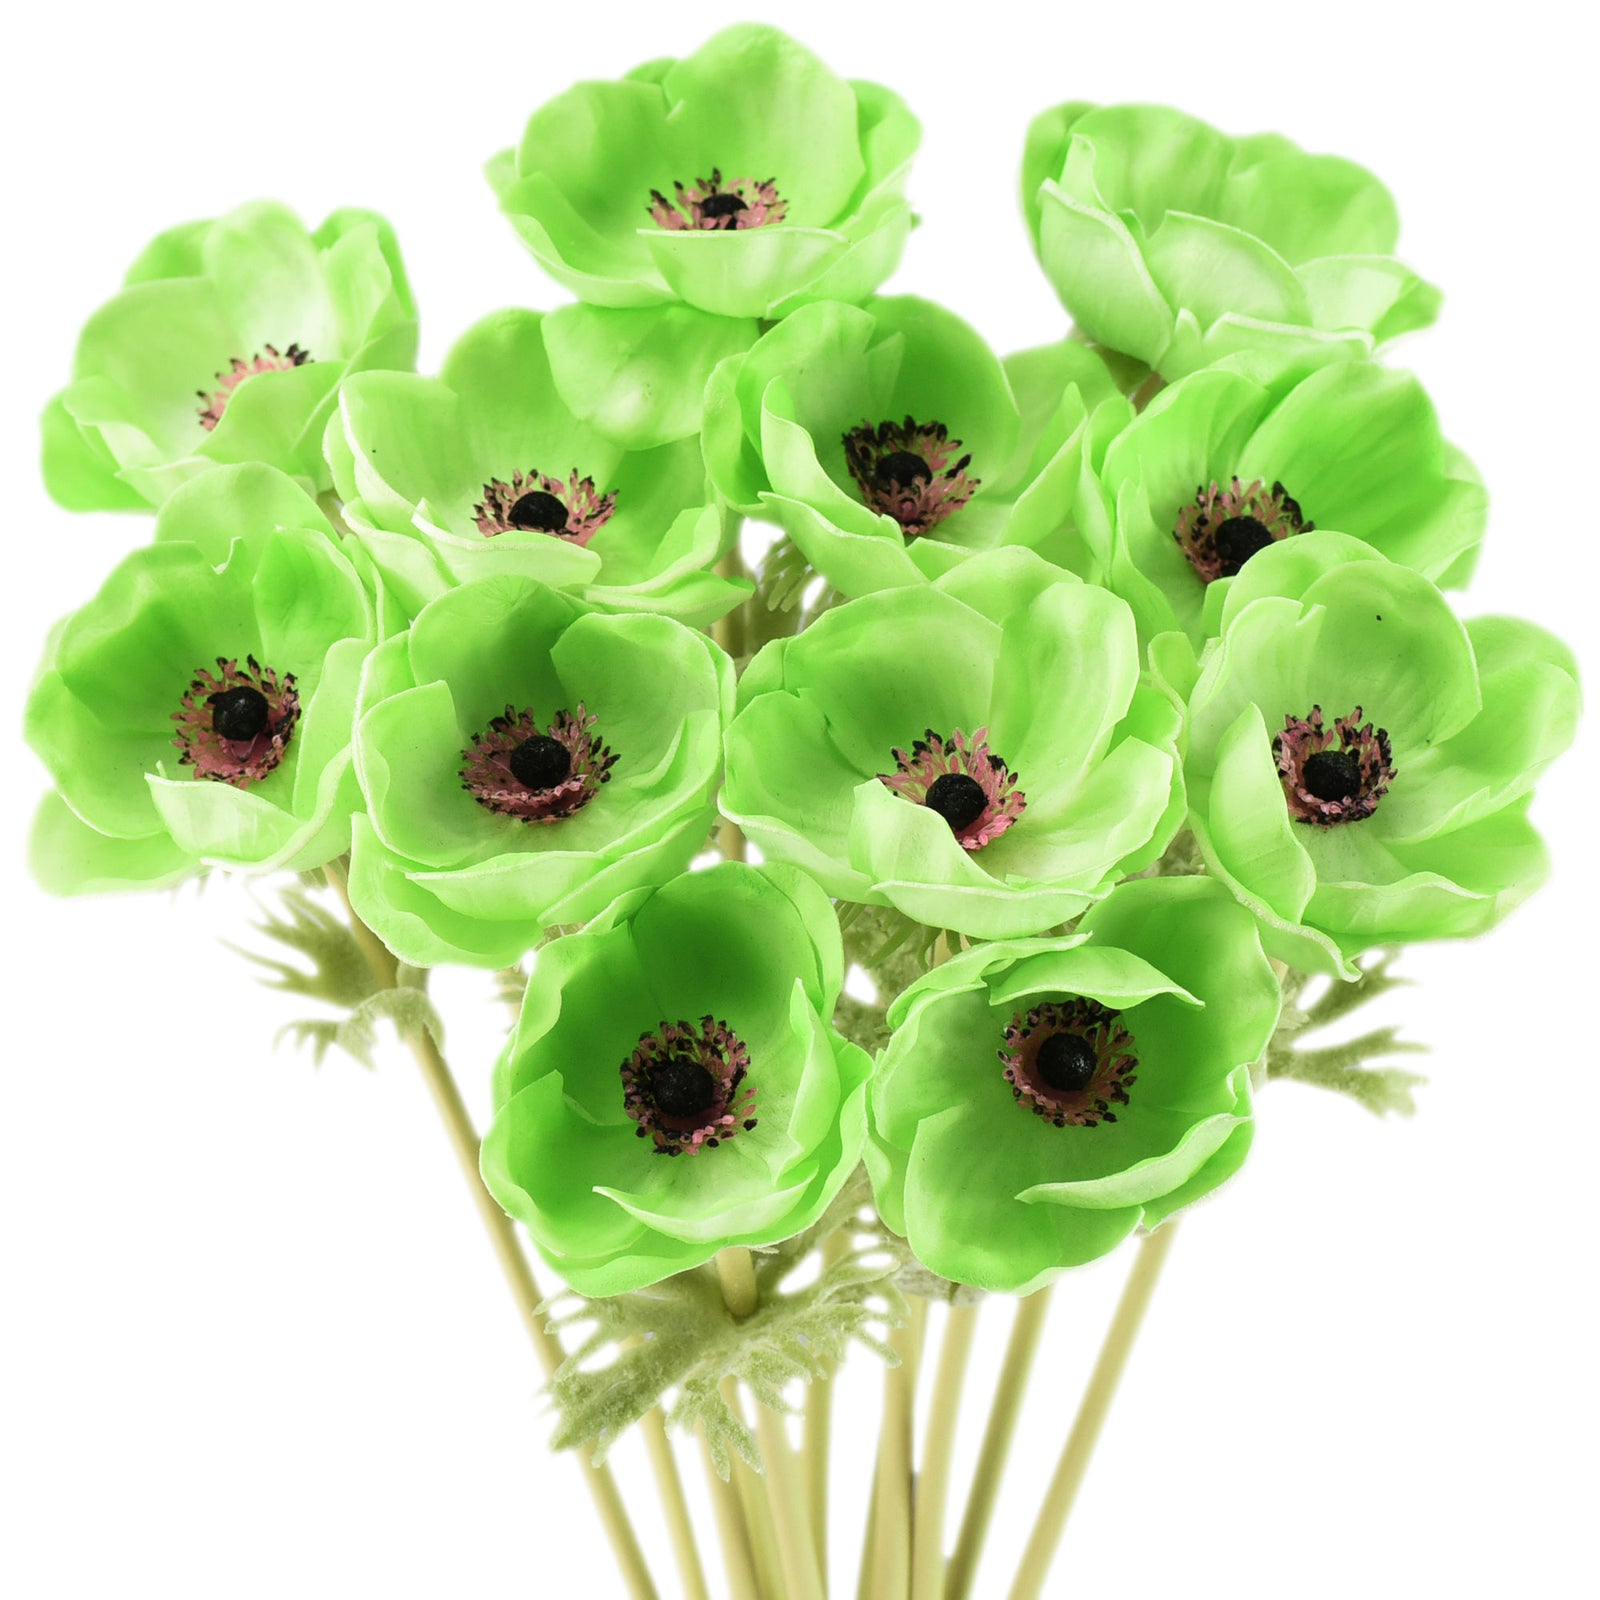 12 Long Stems of ‘Real Touch’ Artificial (Green) Anemone Flowers, Wedding Bouquet Flower Arrangement, 45cm (17.7 inches)